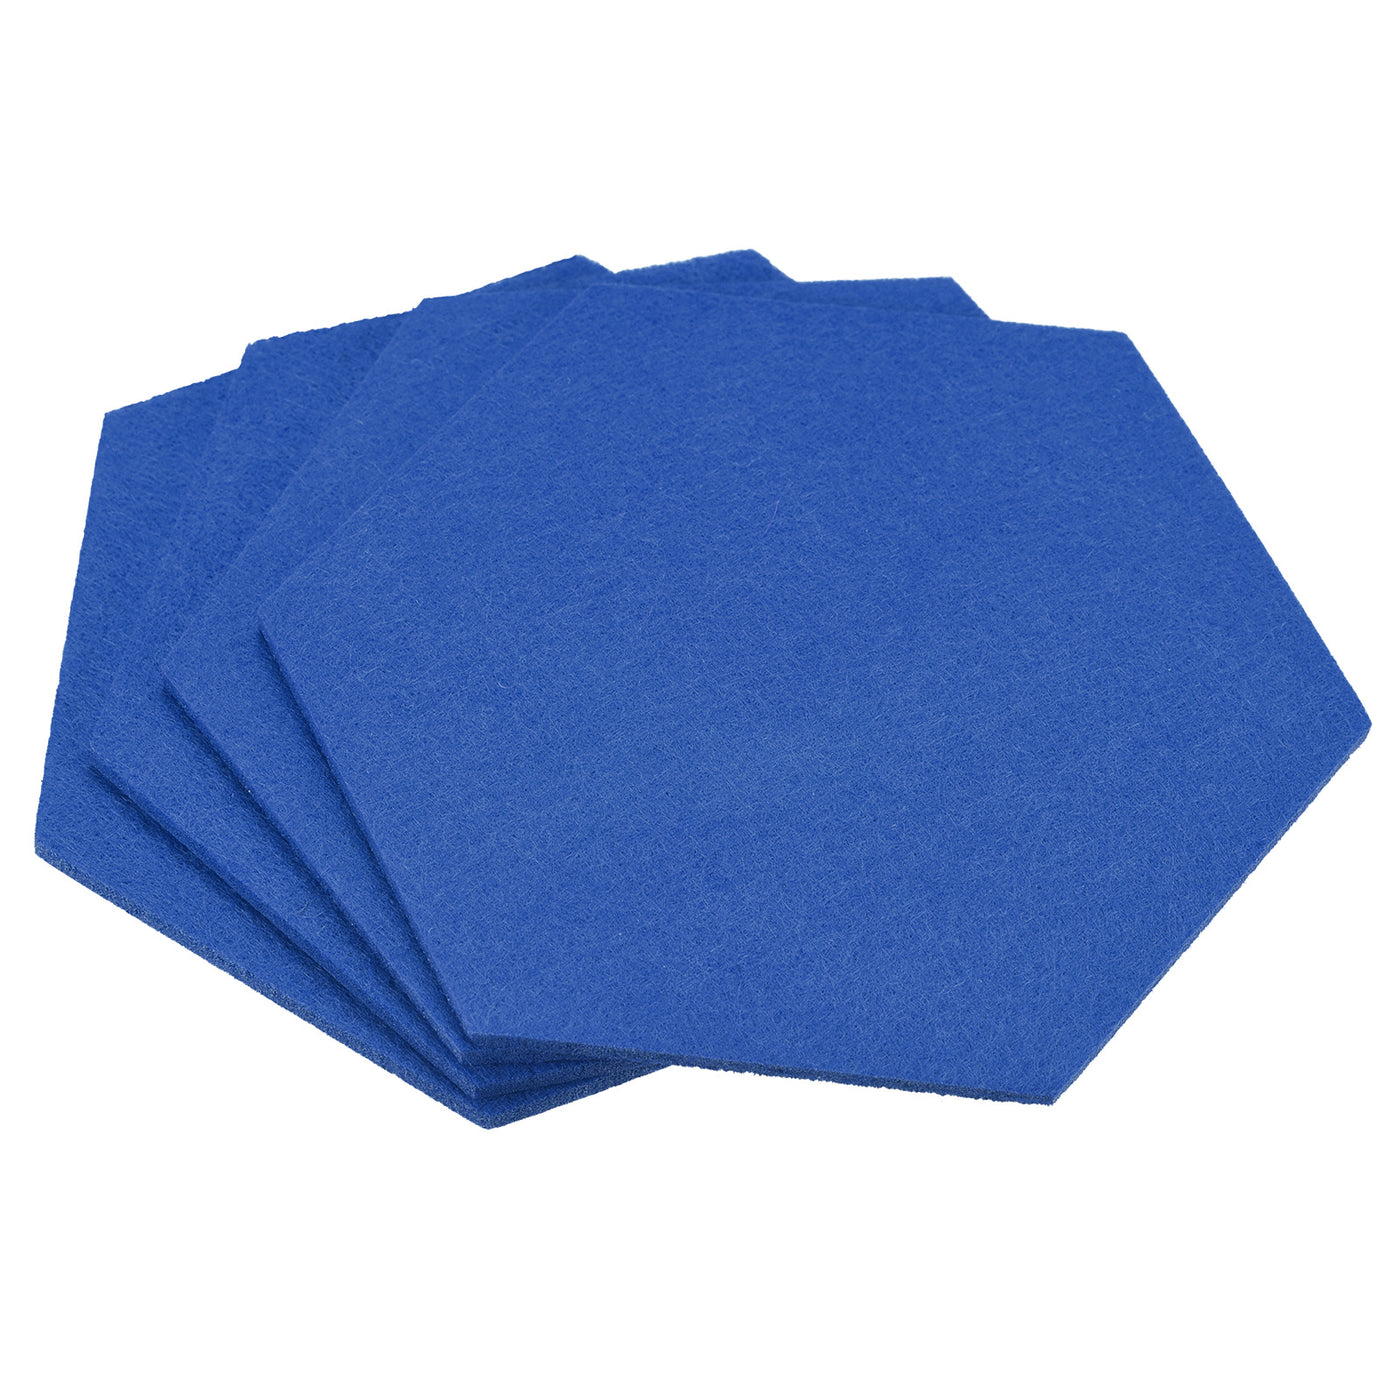 uxcell Uxcell Felt Coasters 4pcs Absorbent Pad Coaster for Drink Cup Pot Bowl Vase Blue